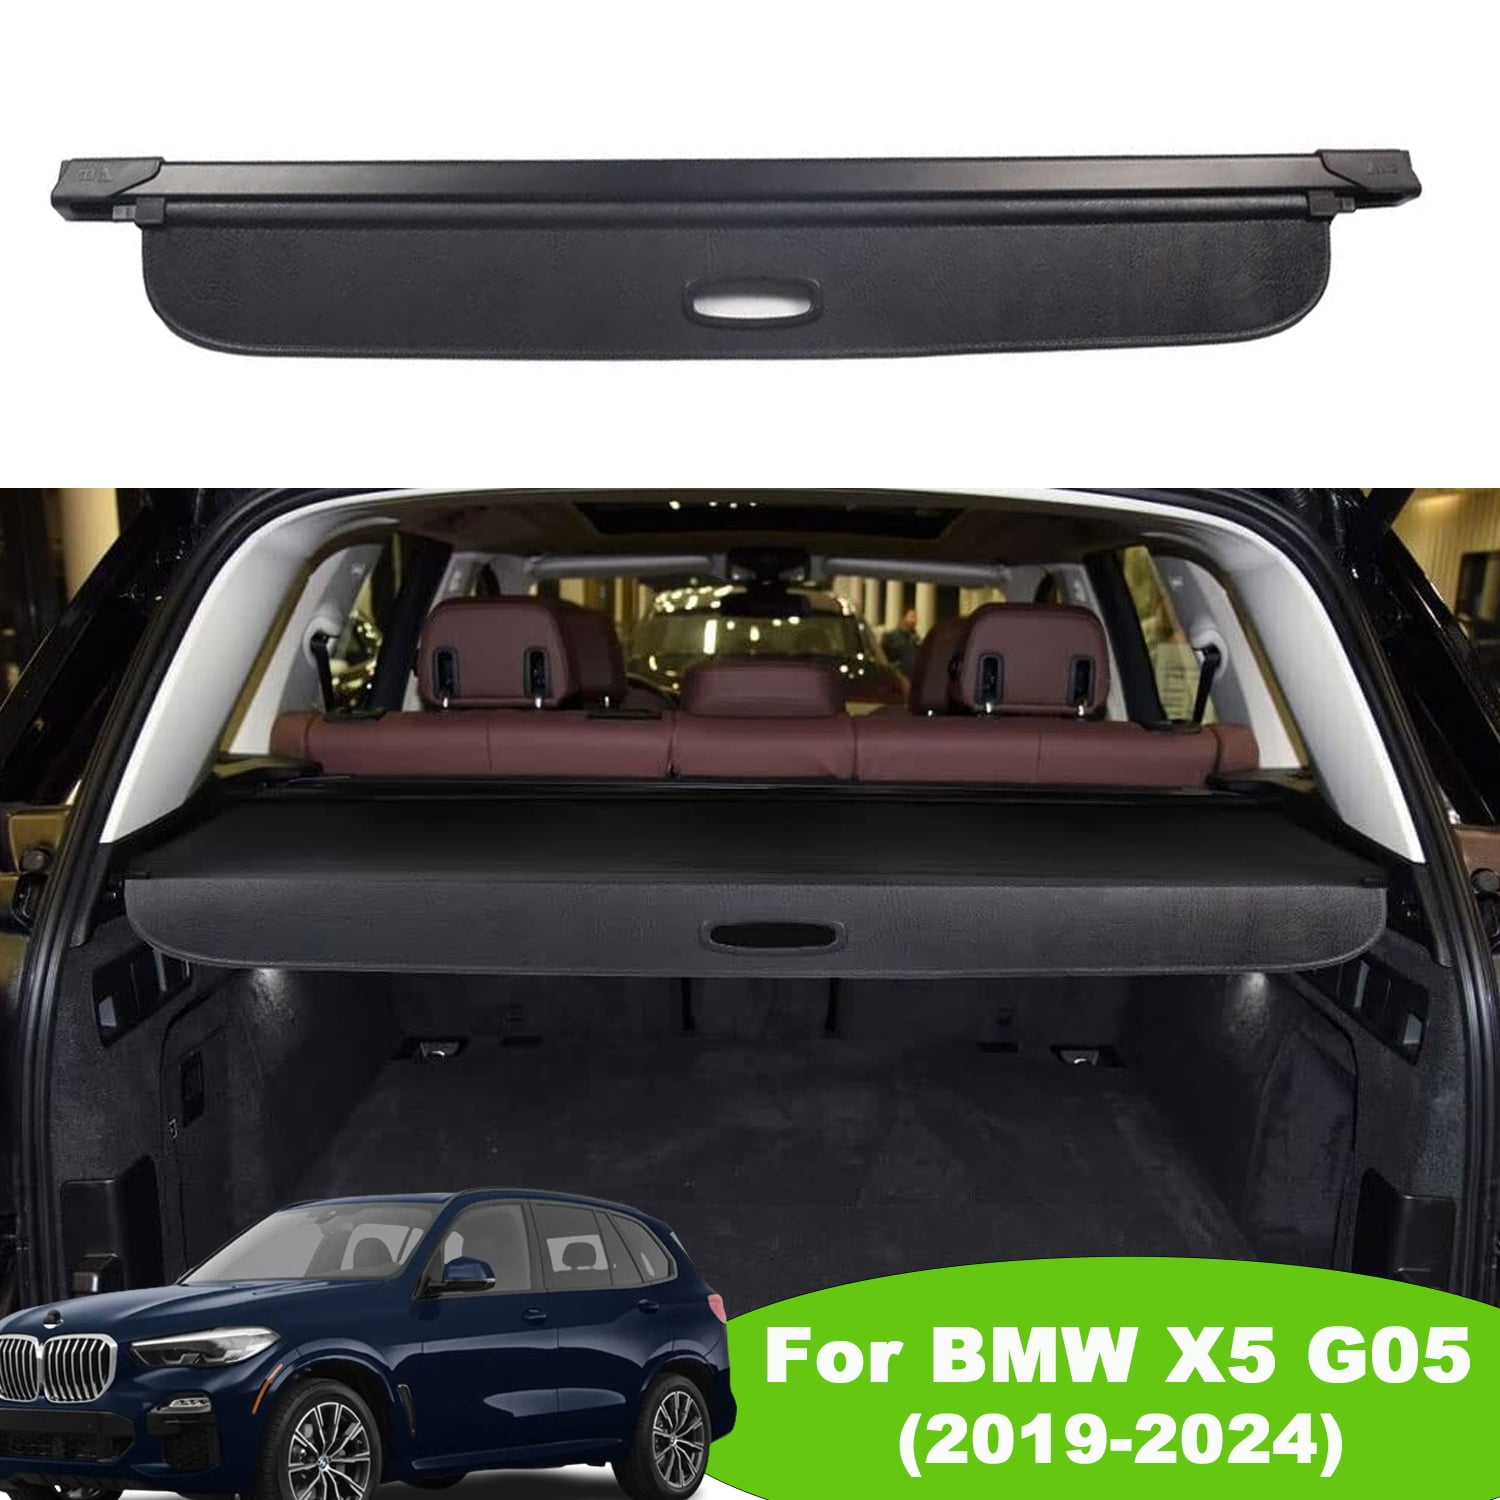 Fit 2019-2024 BMW X5 Retractable Cargo Cover for BMW X5 2019 2020